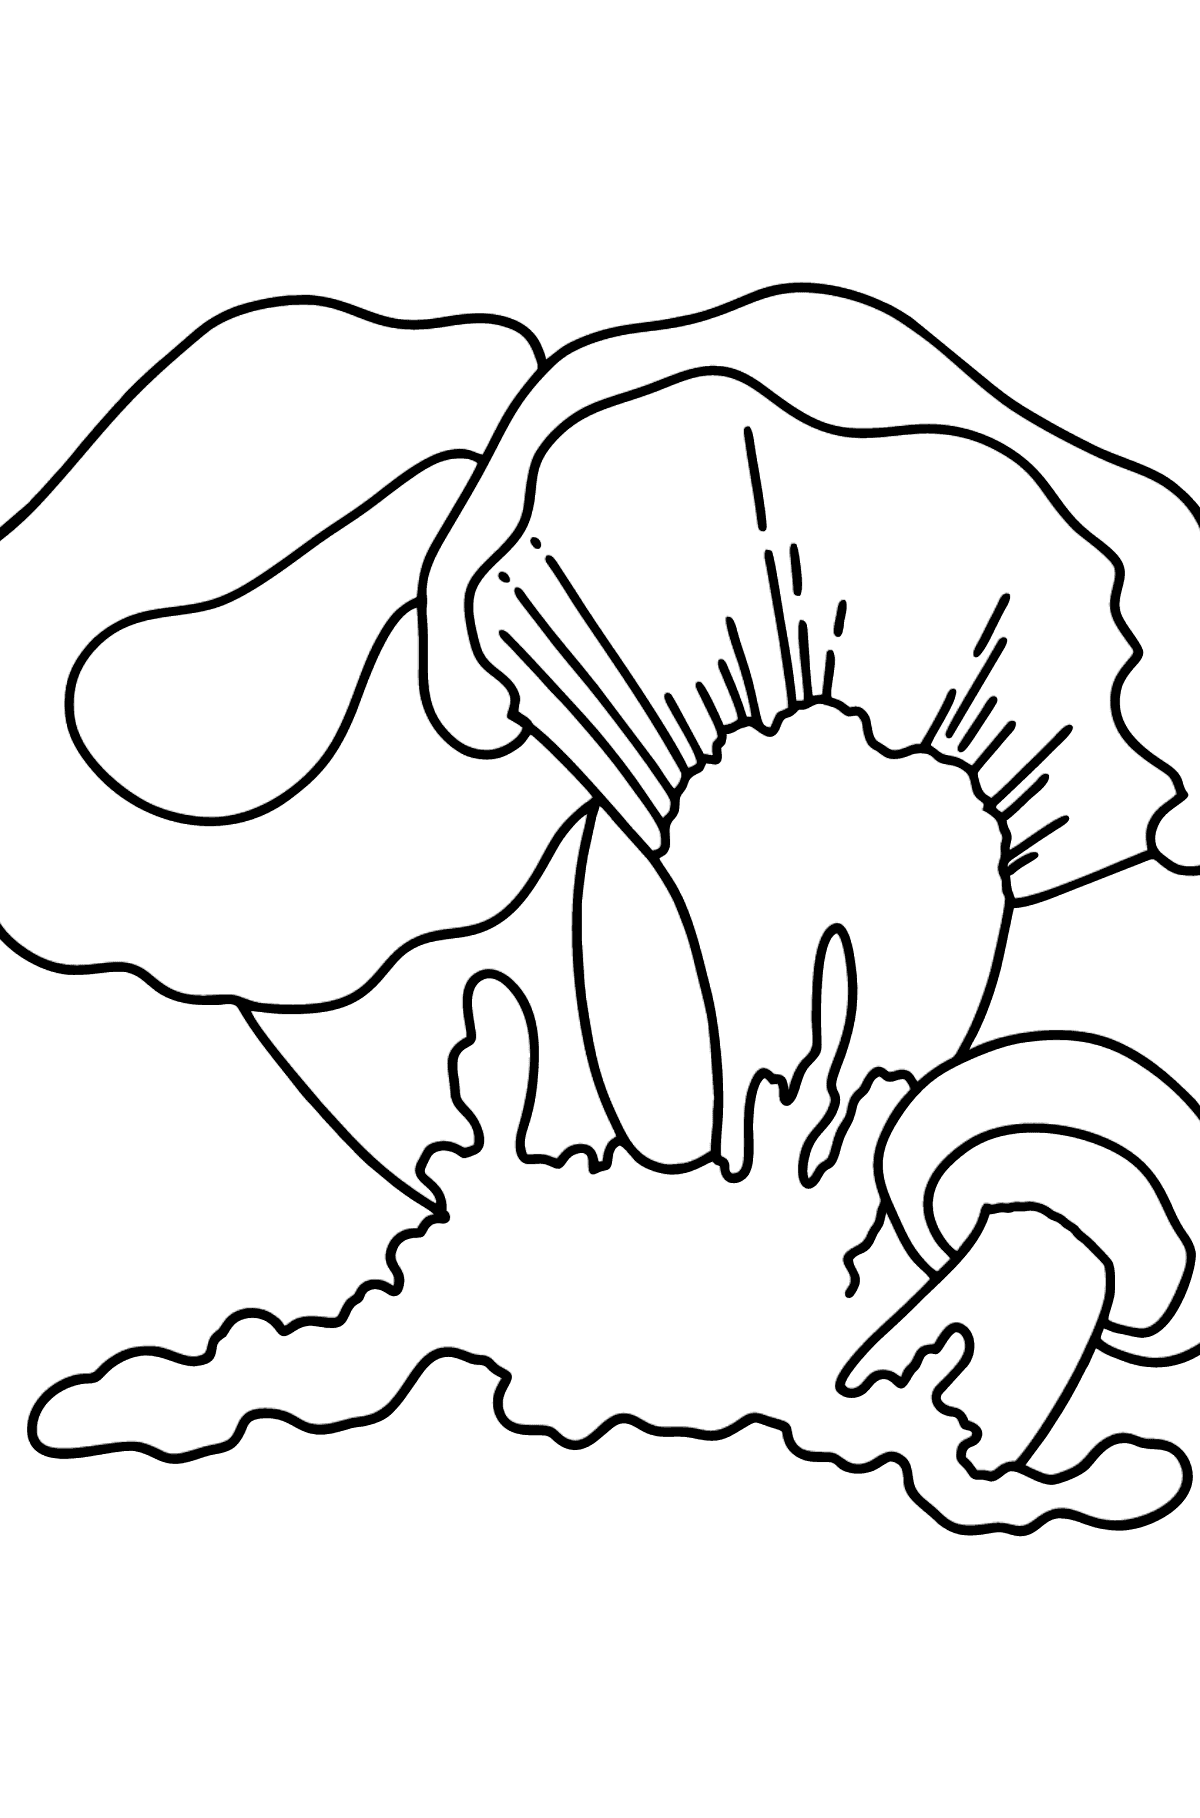 Autumn chanterelles coloring page - Coloring Pages for Kids